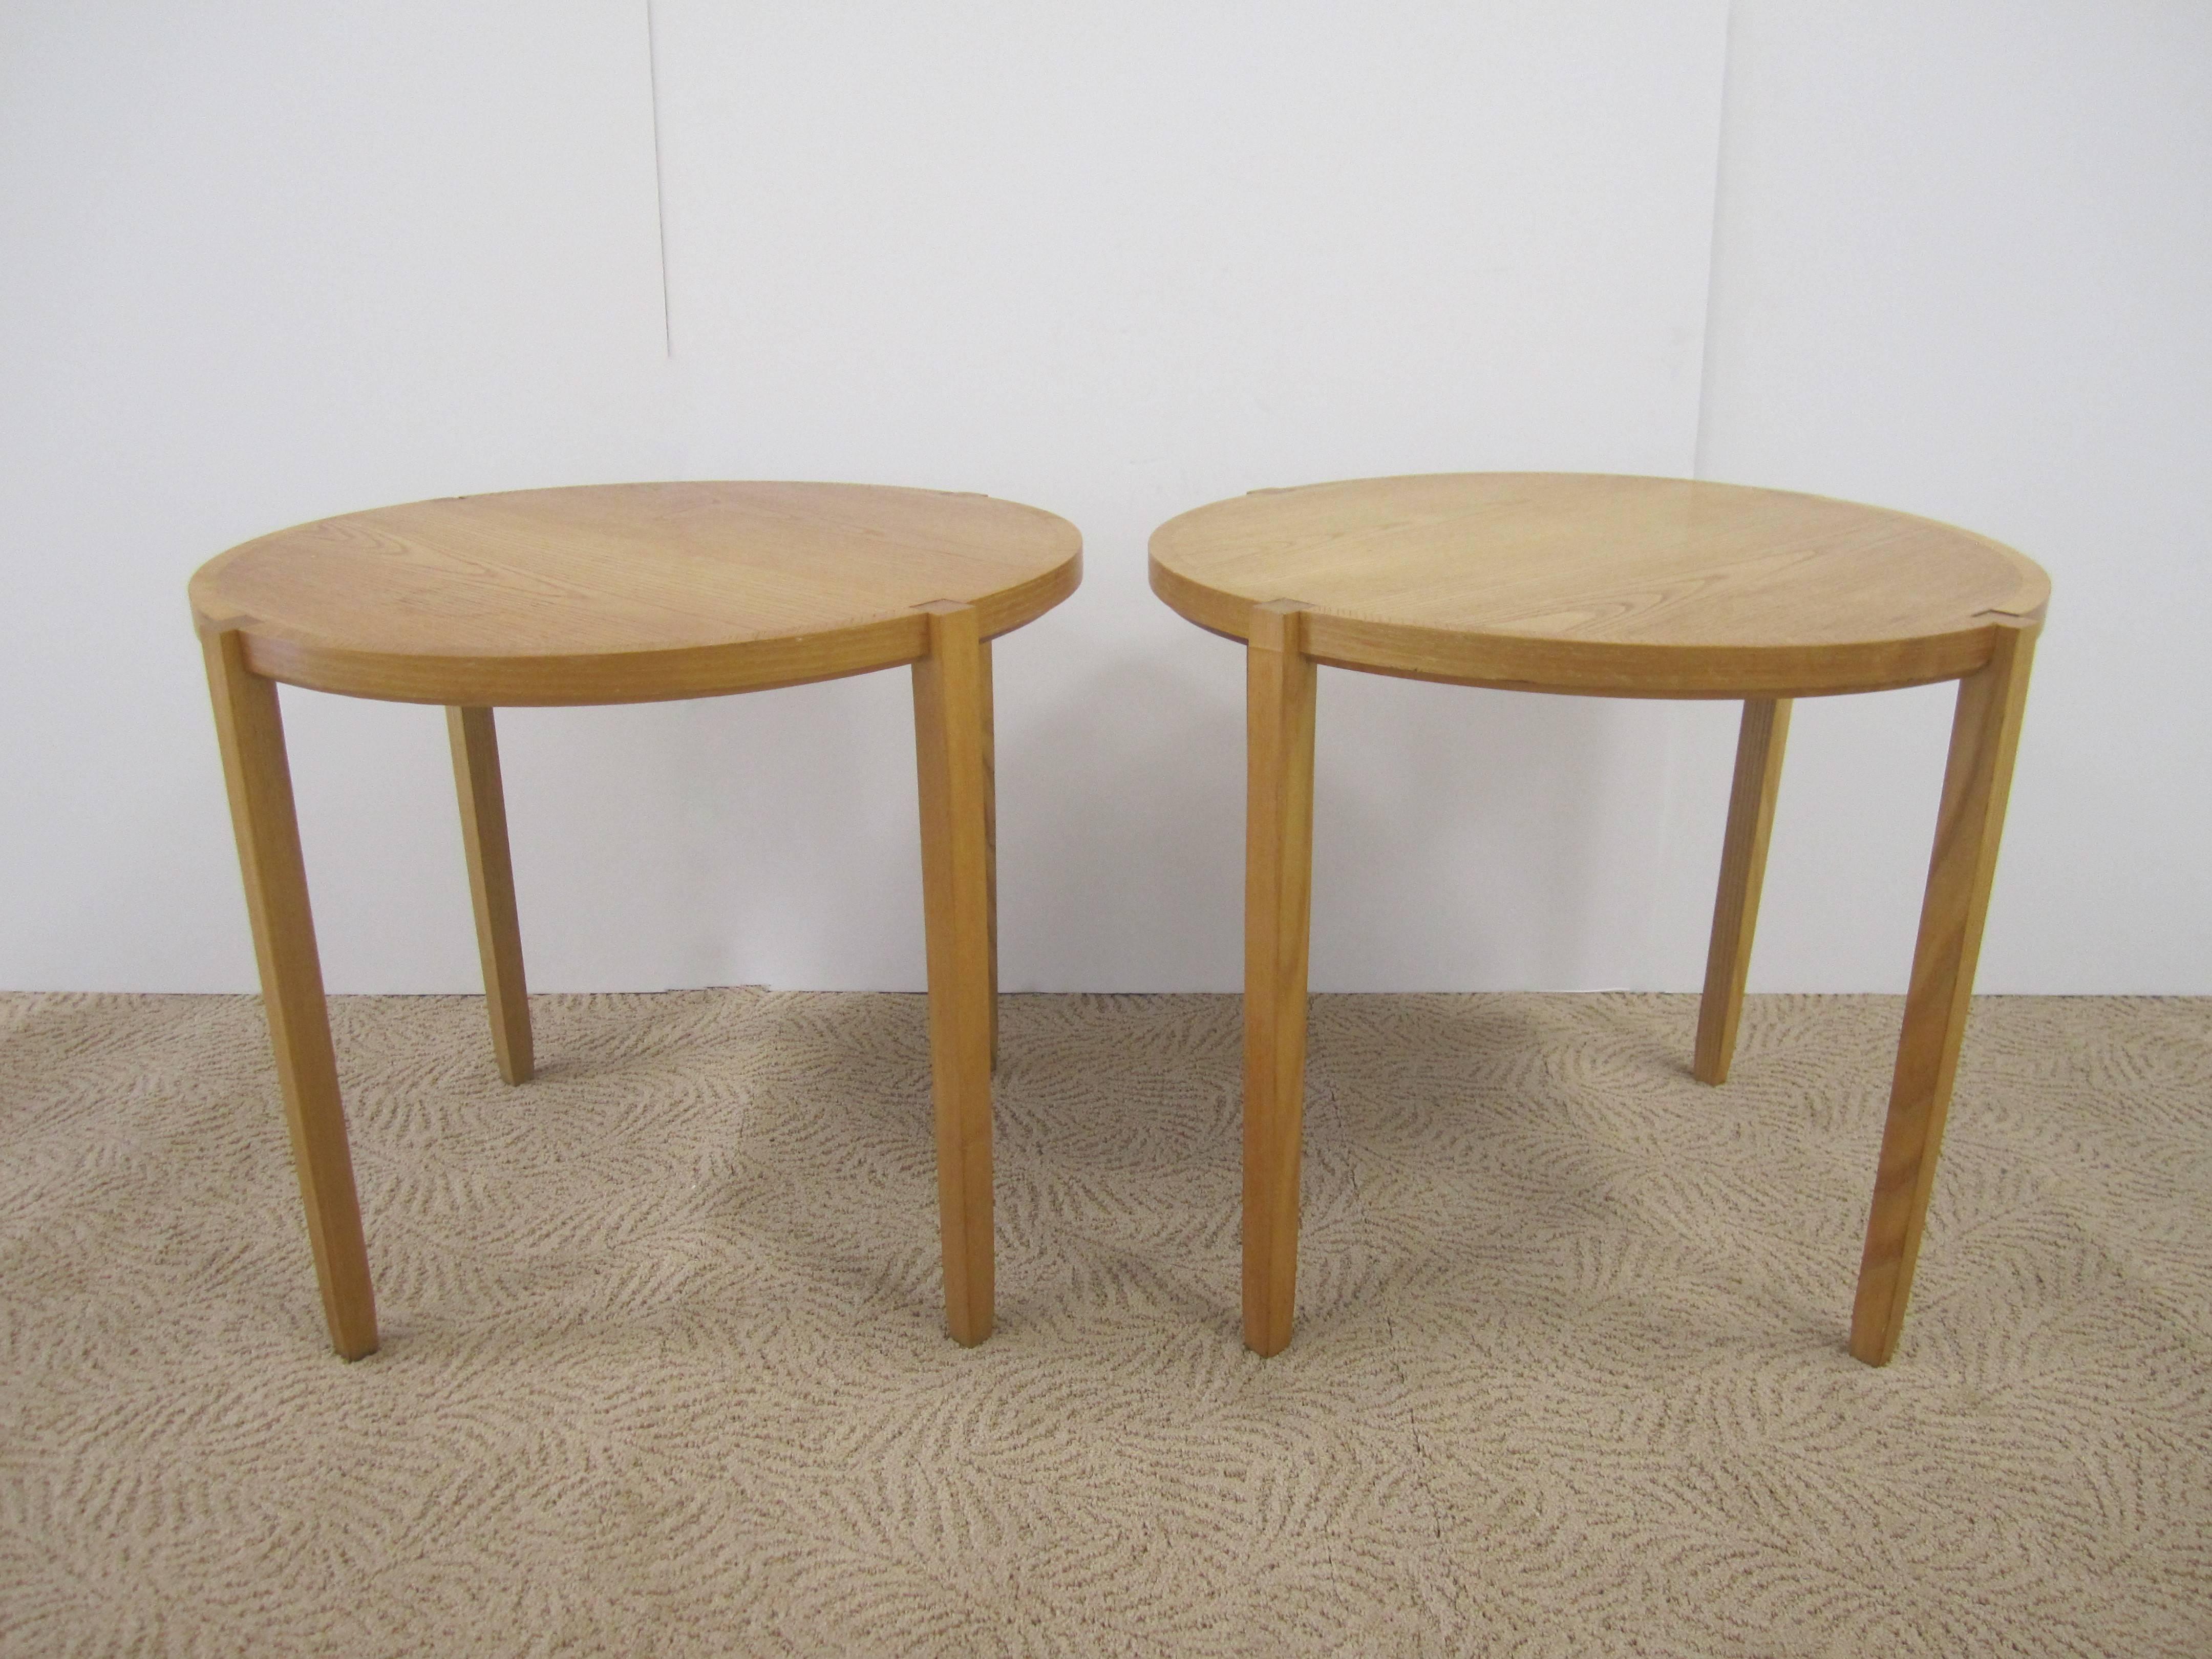 A pair of round end or nightstand tables by designer Timothy Defiebre for Brickel Associates. Oak tables are in an 'ash' finish with a thin tapered leg. With maker's mark and designer mark as show in image #10. Pair available here online. By